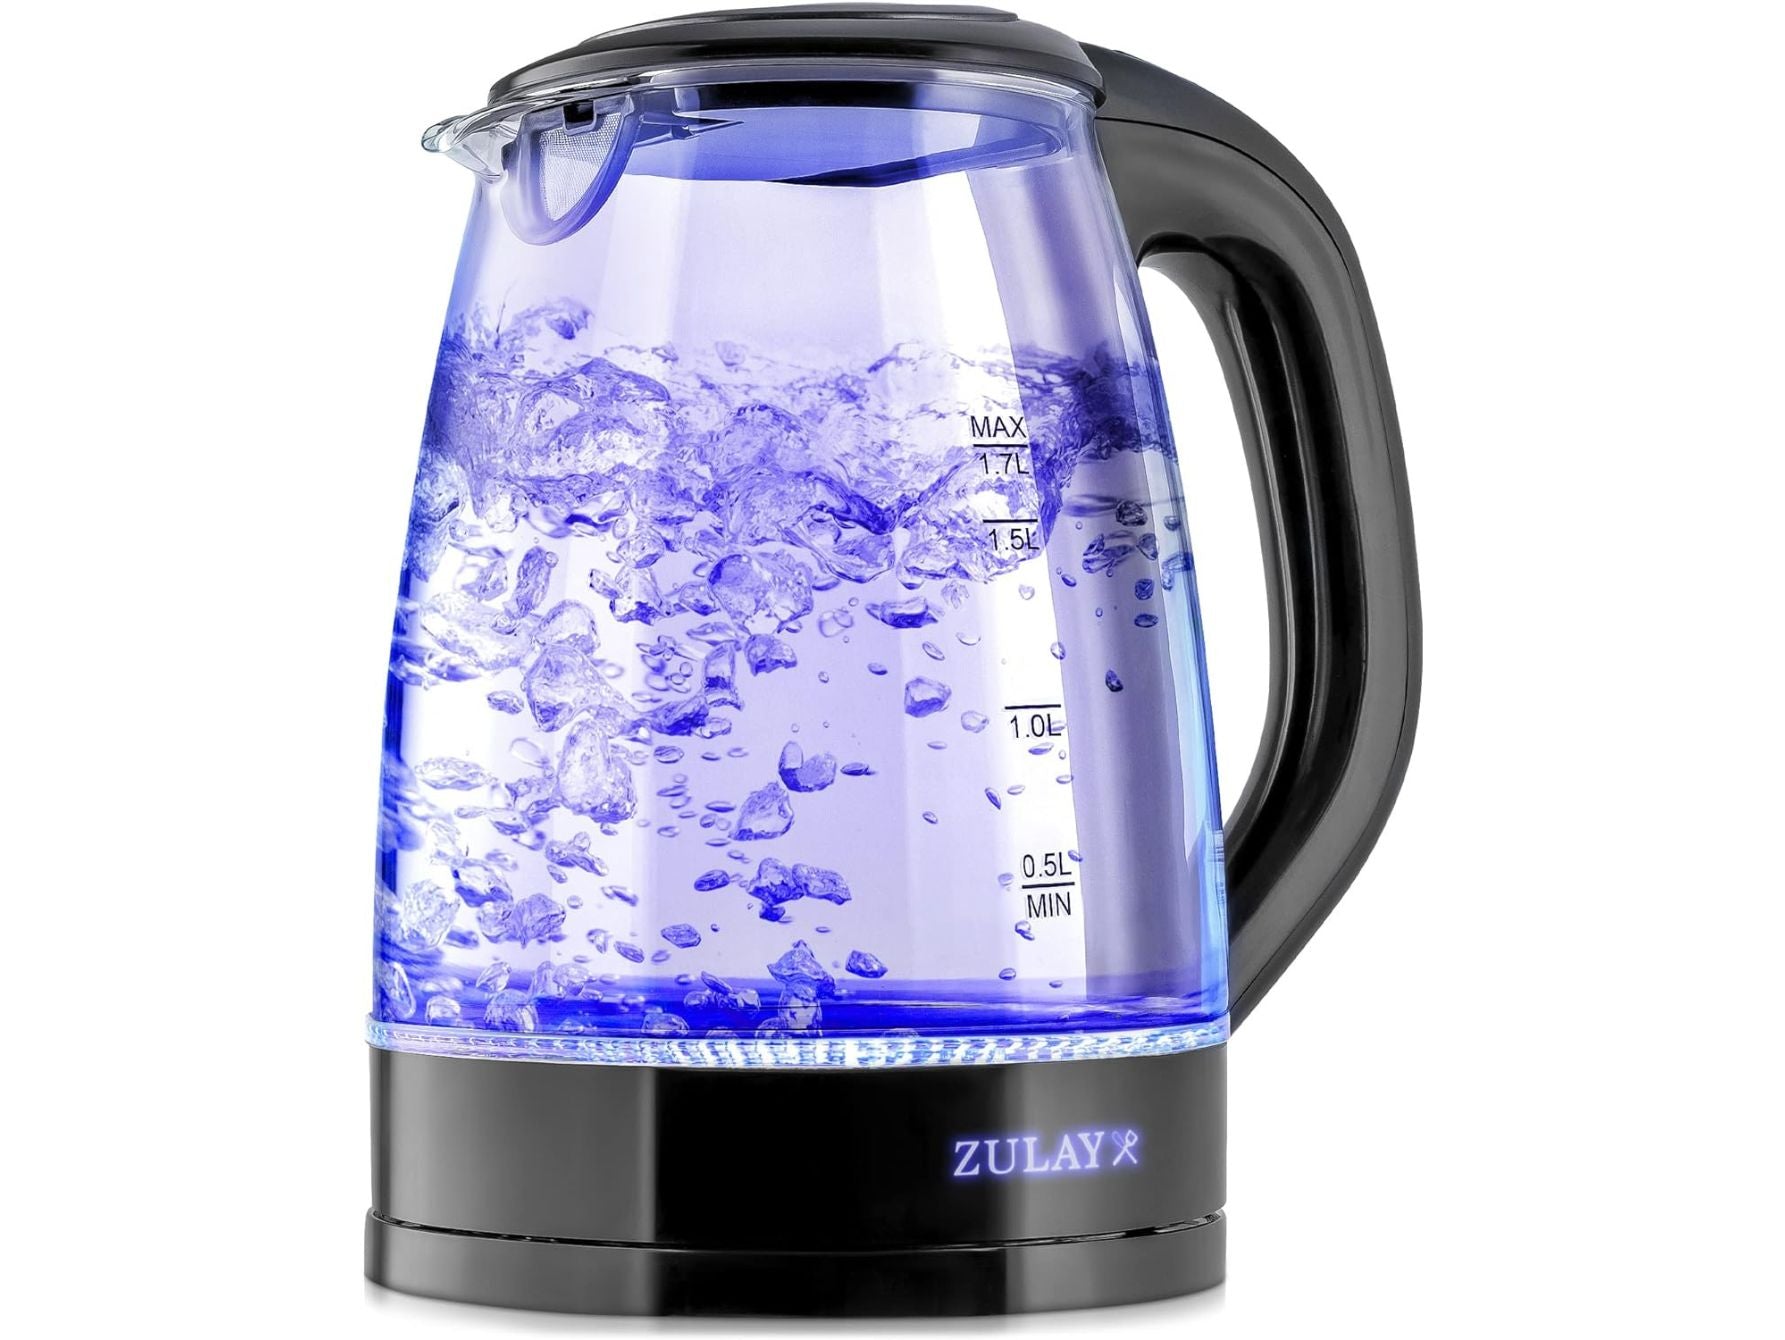 Zulay 1.7L Glass Electric Kettle with 360° Swivel Base